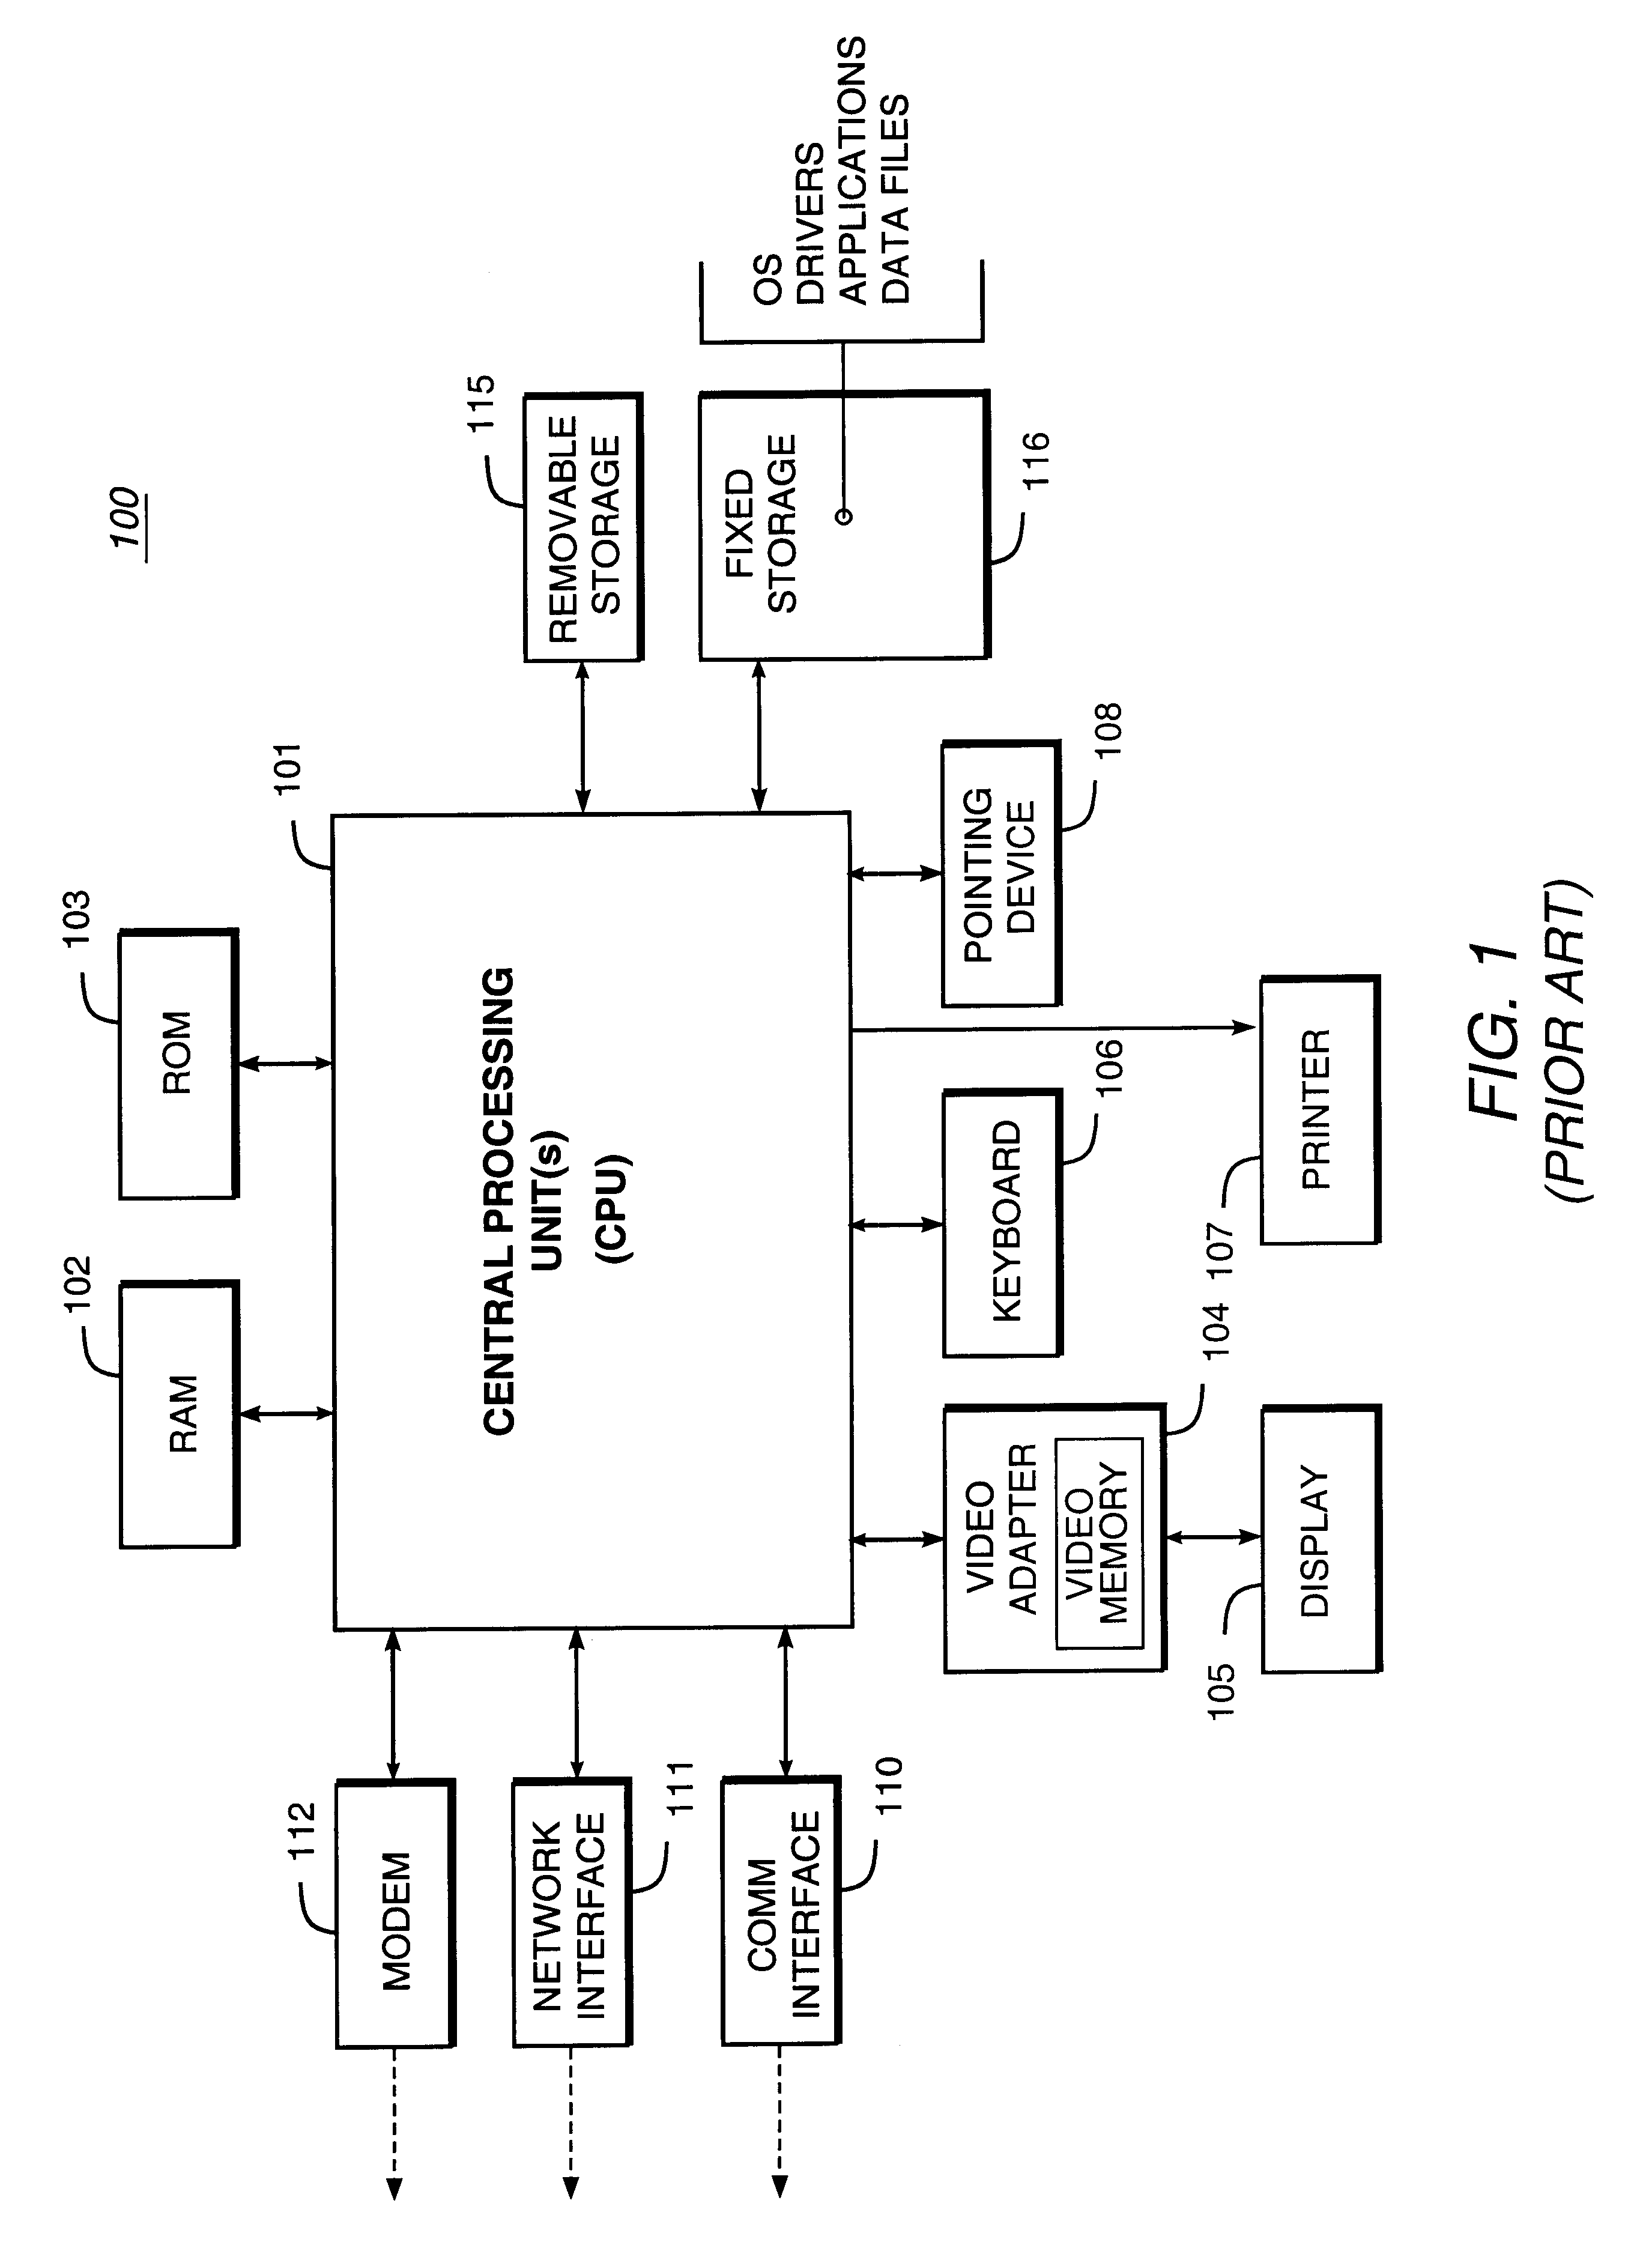 Methodology providing high-speed shared memory access between database middle tier and database server